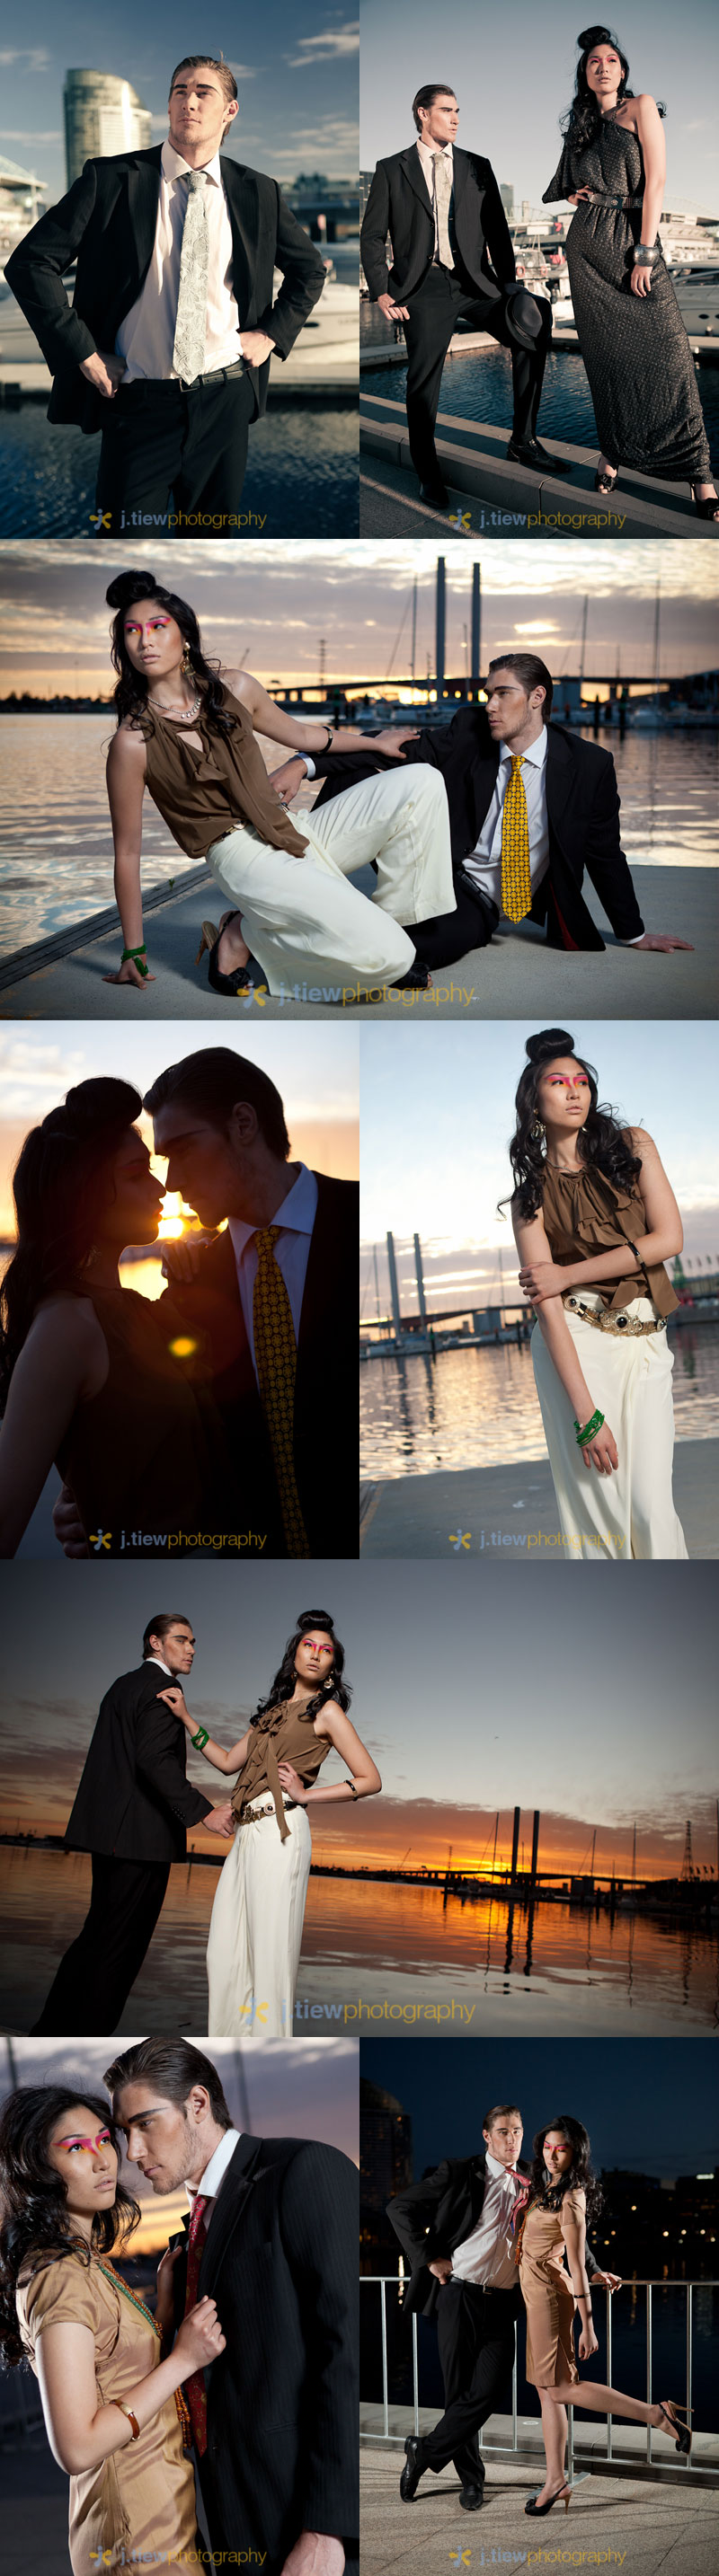 Male and Female model photo shoot of Justin Tiew, Christopher Atkins and Jia-Li in Docklands Waterfront Marina, wardrobe styled by cecyliadotcom, makeup by Melanie Matic